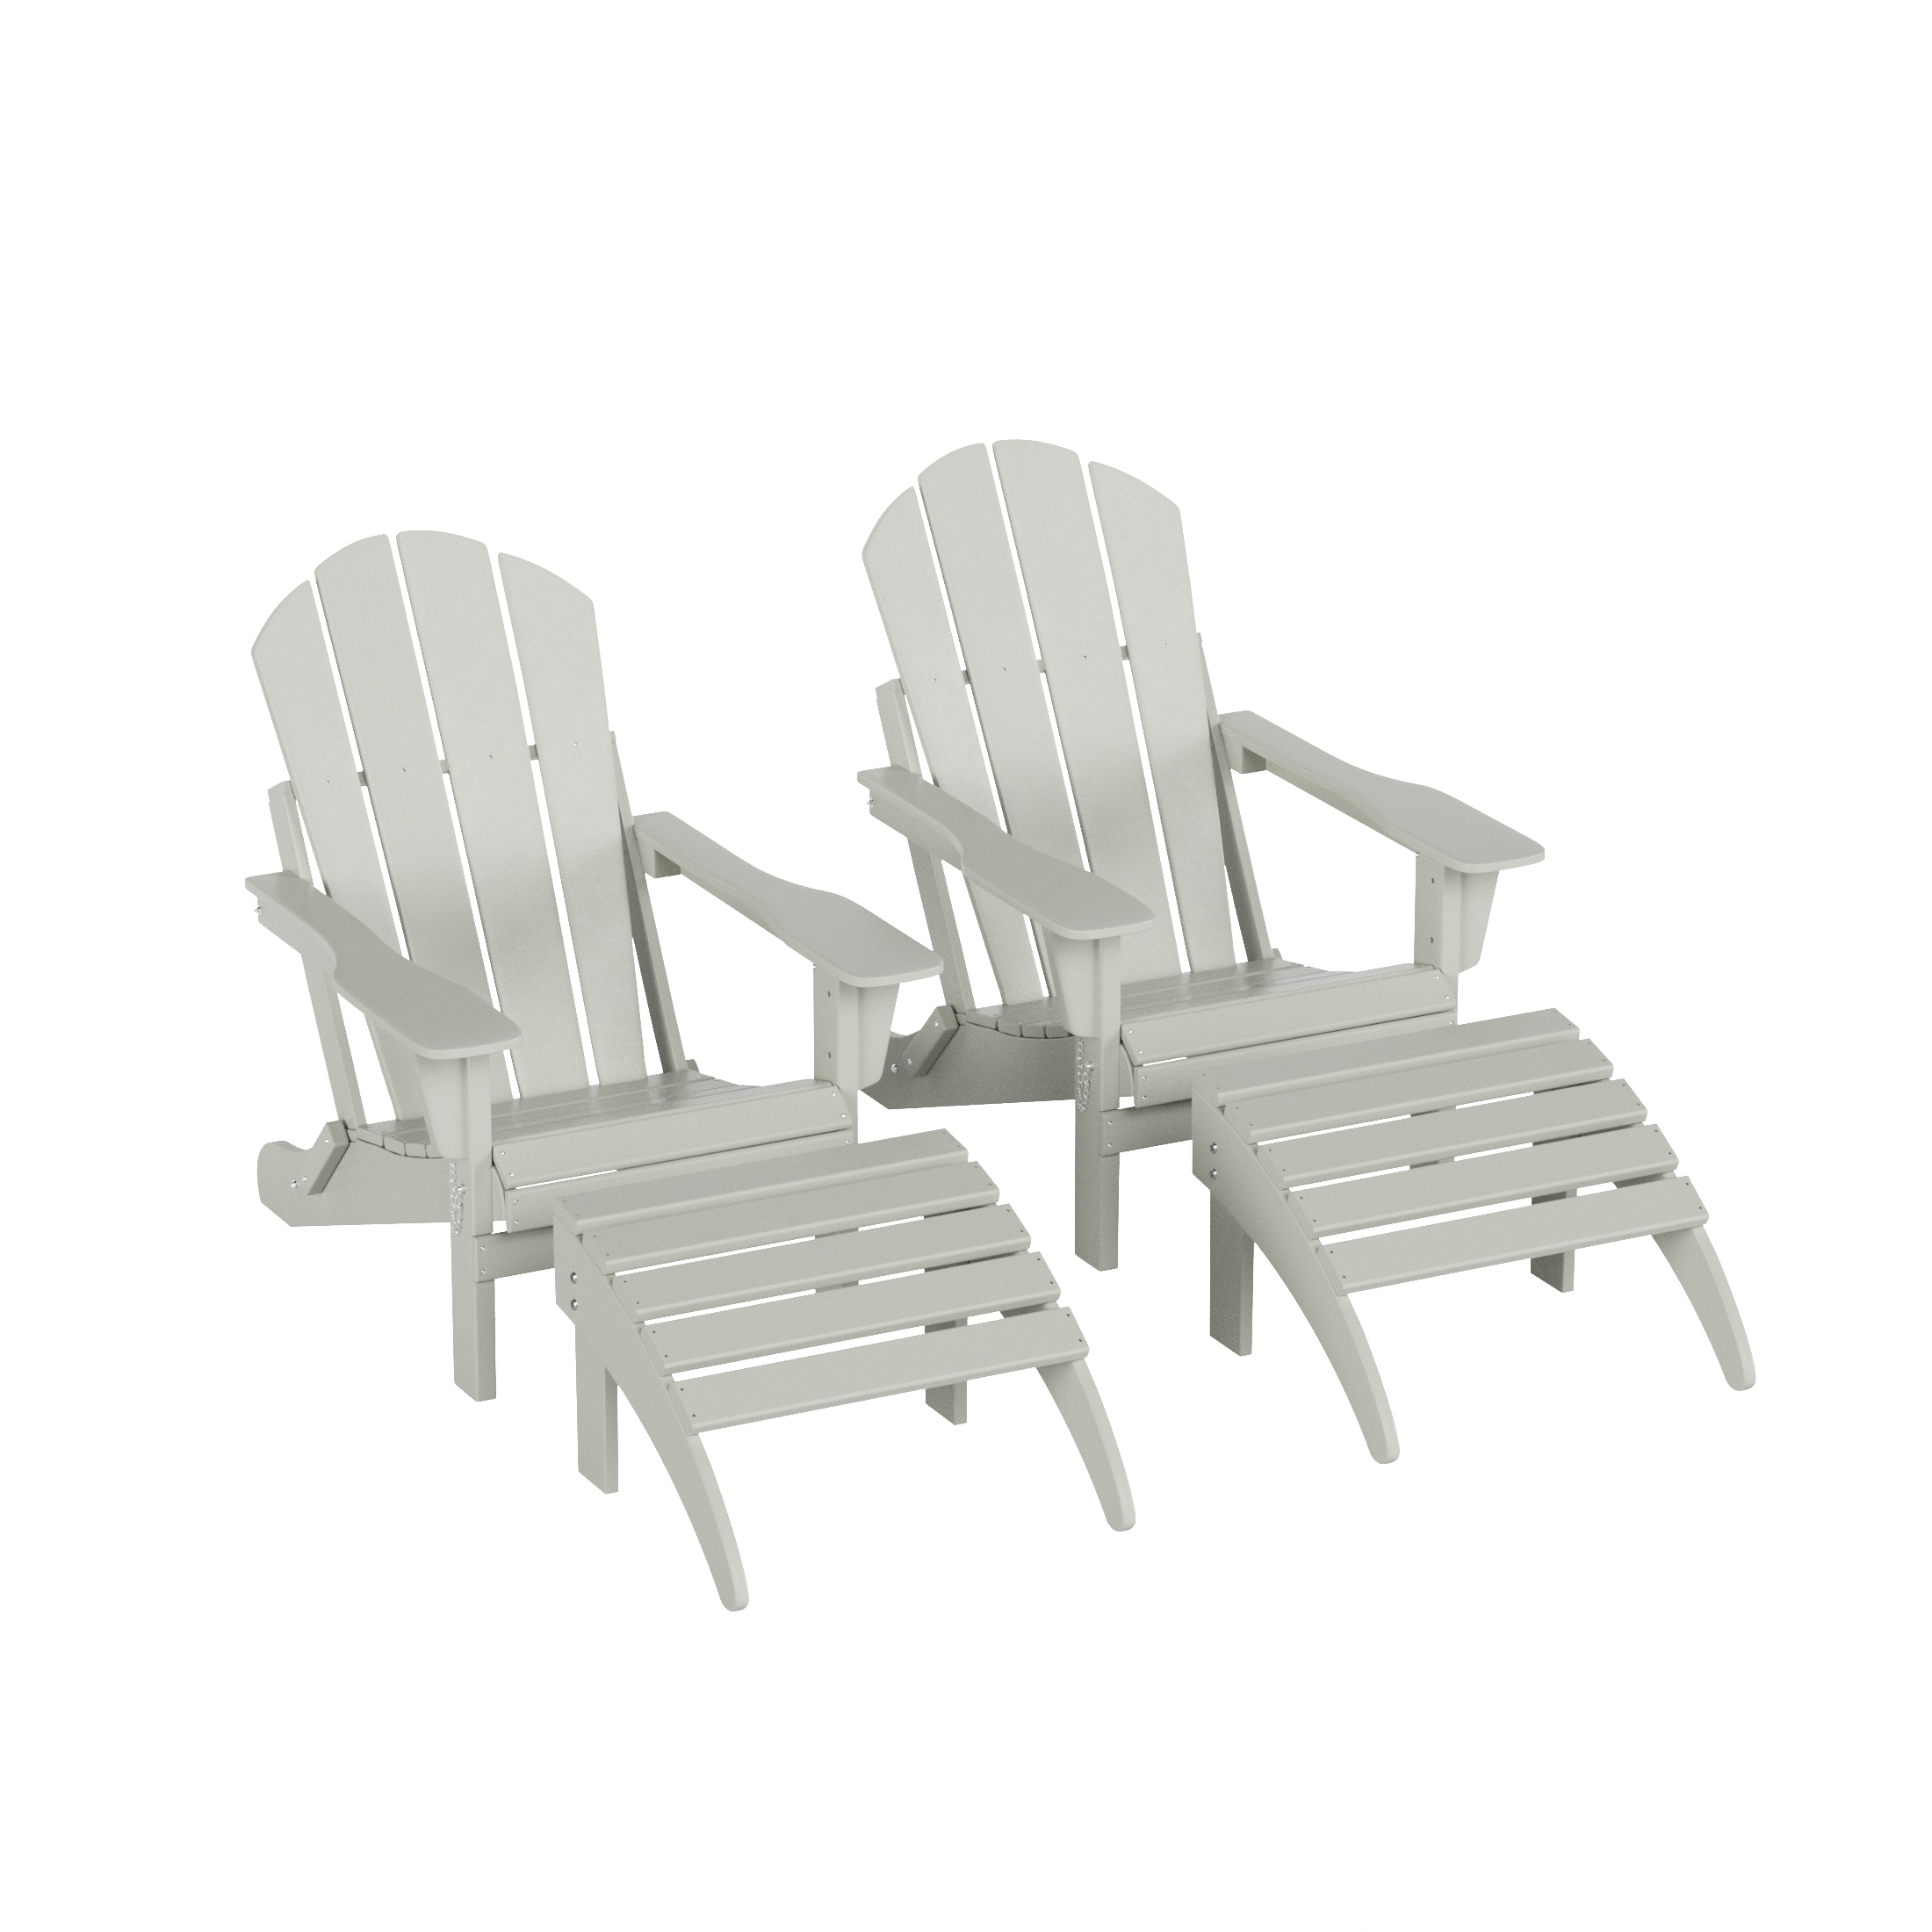 WestinTrends Malibu Outdoor Lounge Chair Set, 4-Pieces Adirondack Chair Set of 2 with Ottoman, All Weather Poly Lumber Patio Lawn Folding Chair for Outside Pool Beach, Sand - image 4 of 5